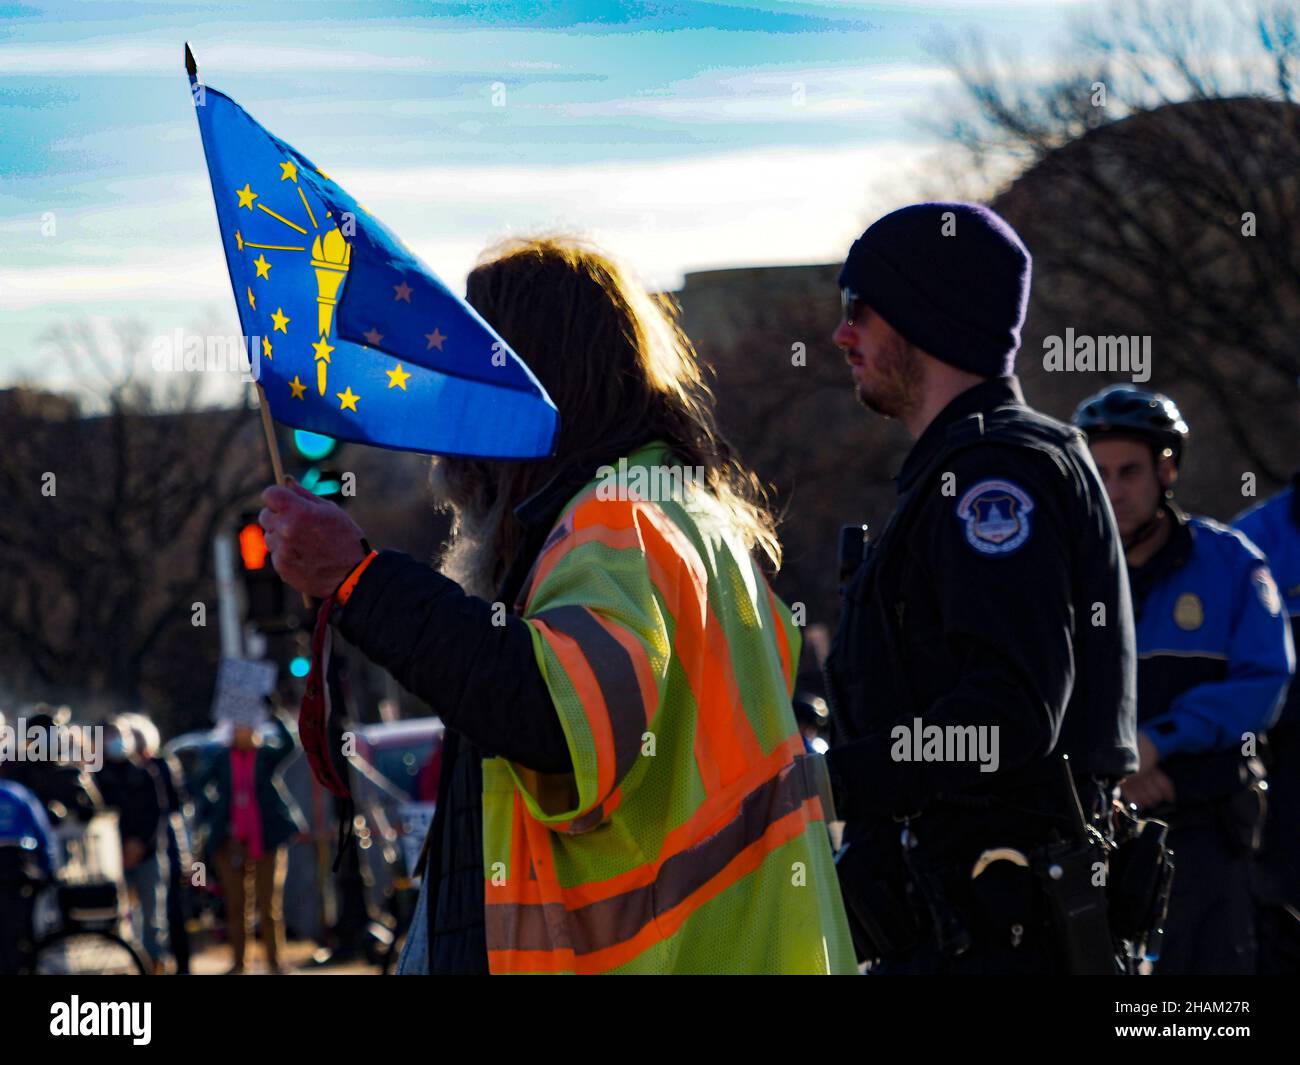 December 13, 2021, Washington, District of Columbia, USA: A man holding the Indiana state flag was one of several dozen arrested for civil disobedience following the Poor People CampaignÃs 'Get it Done in Ã21' rally at the US Capitol. Participants came from close to three dozen states to demand passage of stalled voting rights legislation and the Build Back Better plan before the end of December. (Credit Image: © Sue Dorfman/ZUMA Press Wire) Stock Photo